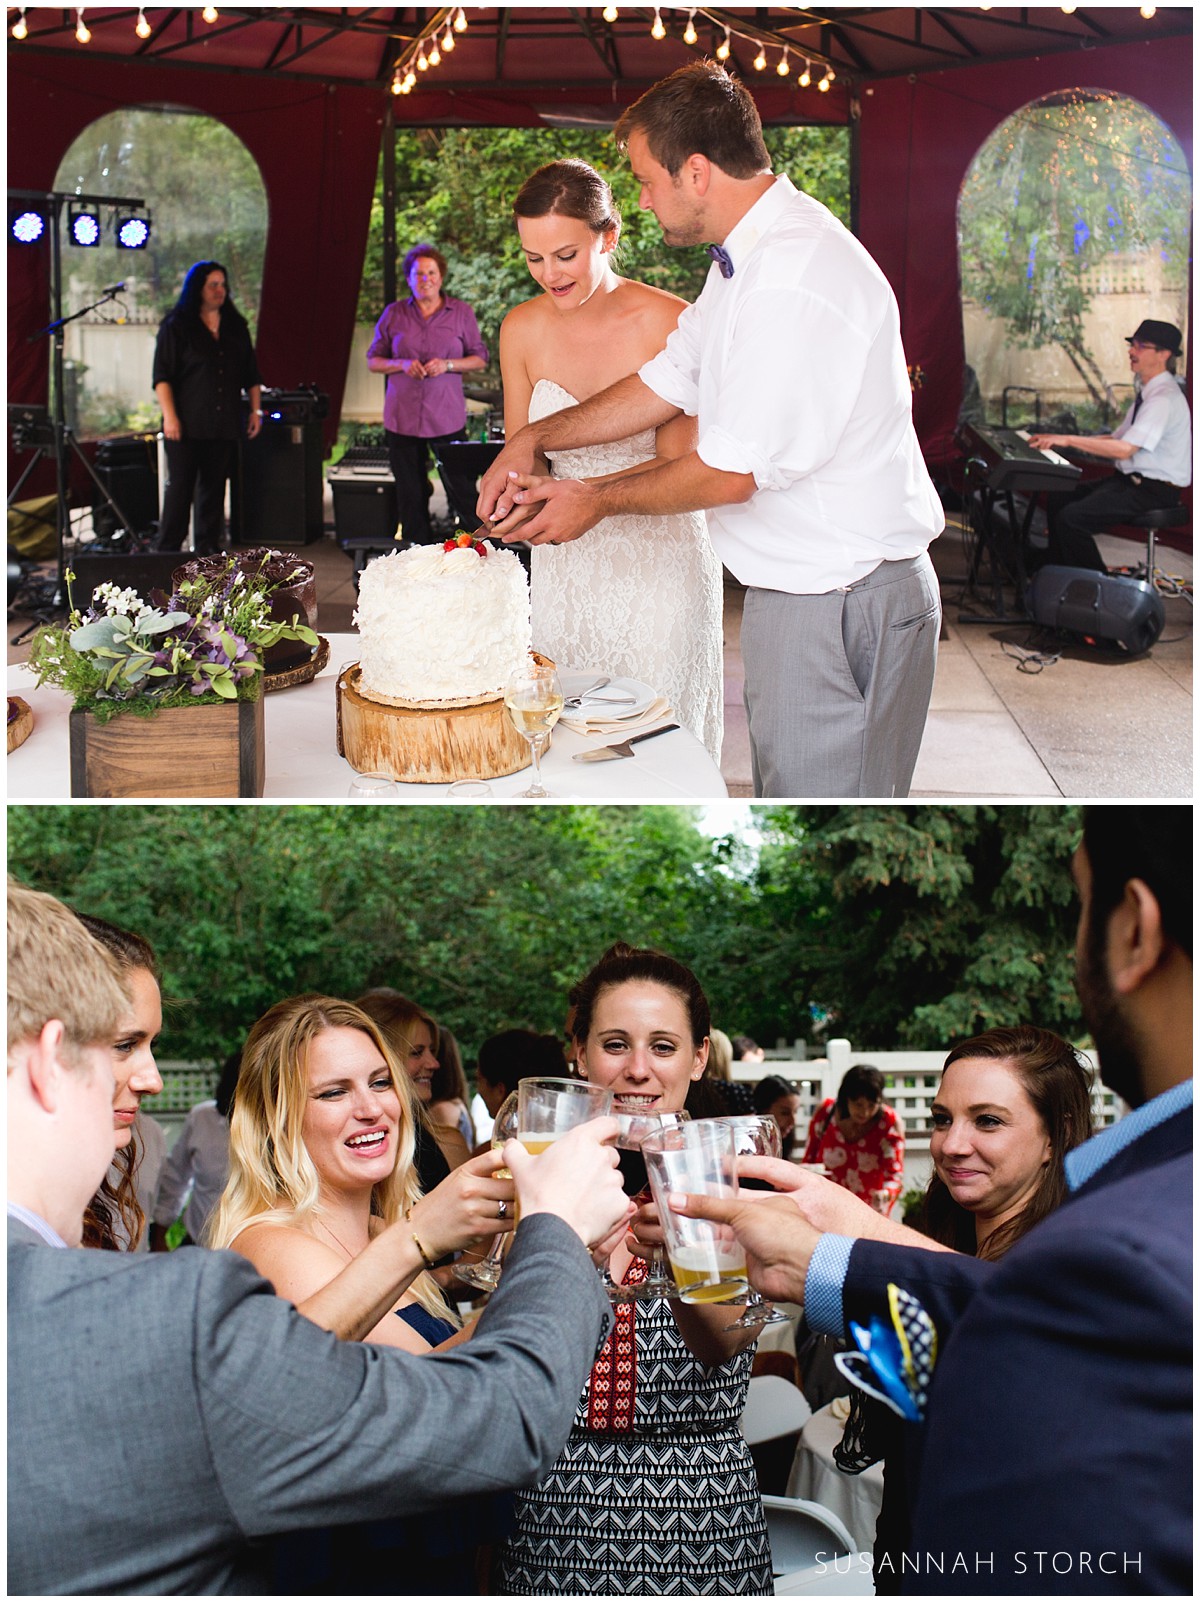 two images of wedding fun: cake cutting and a beer toast